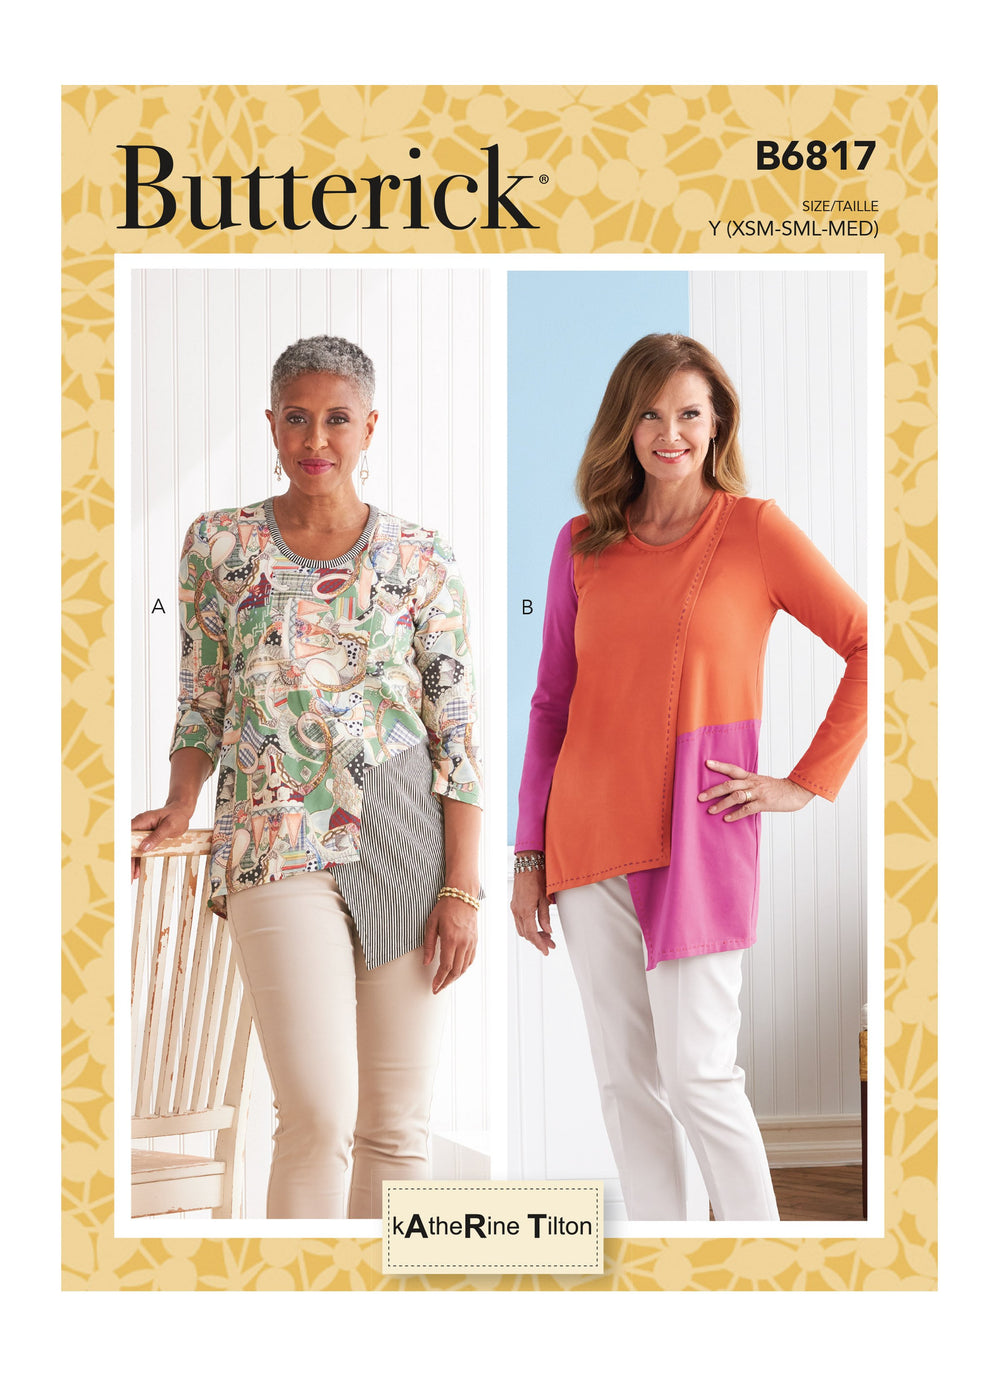 Butterick 6817 Misses Tops Pattern from Jaycotts Sewing Supplies